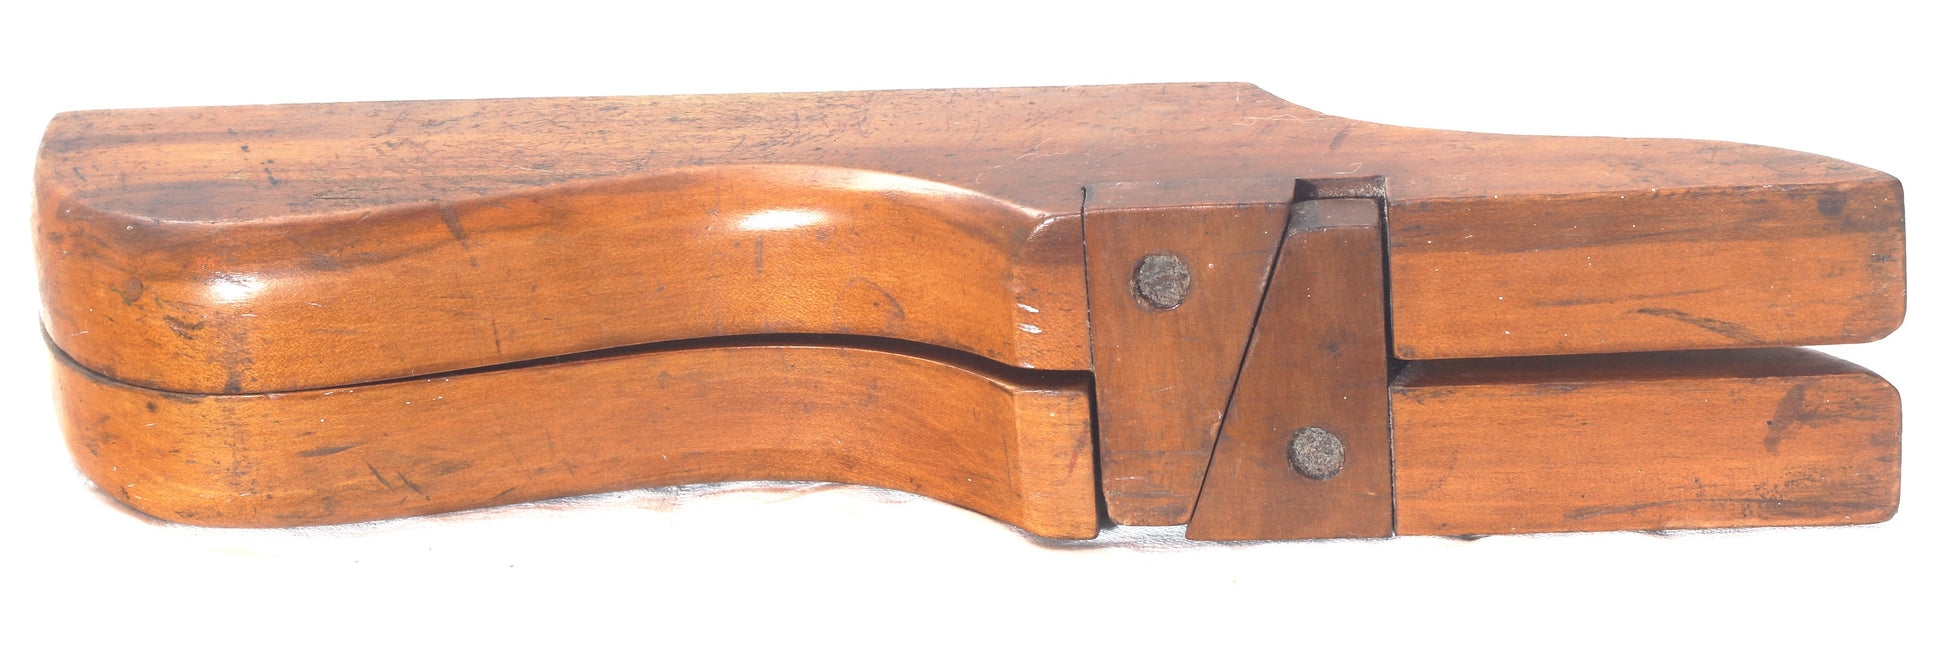 Vintage Mahogany Campaign Folding Boot Jack with Boot Pulls